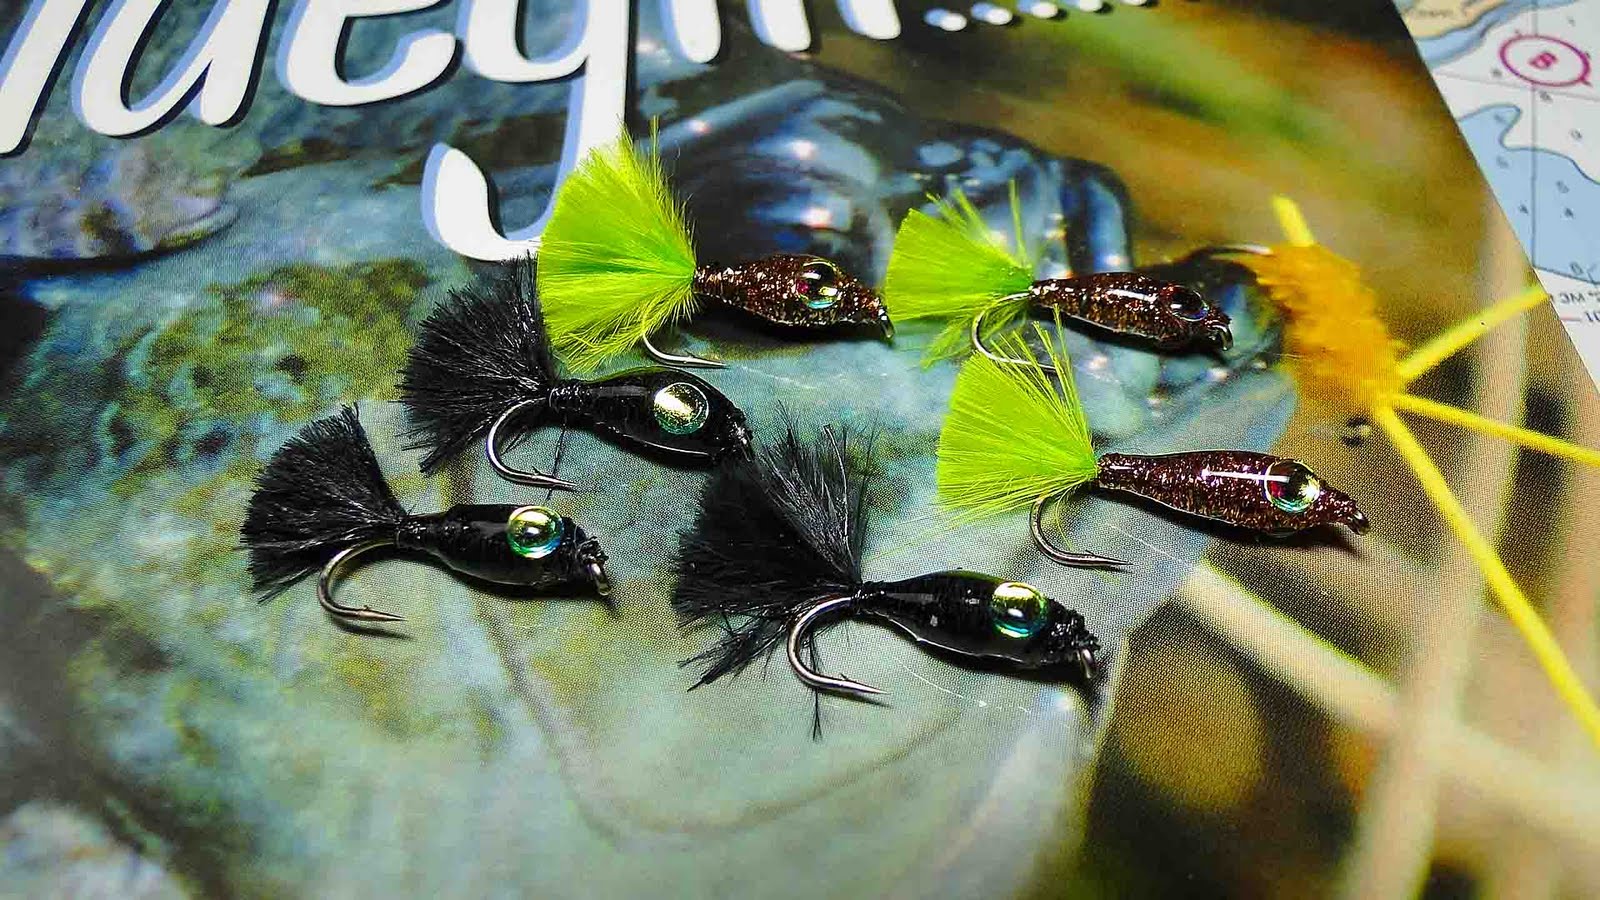 Completely Hooked Lures Minnows Green River (Glows Green)